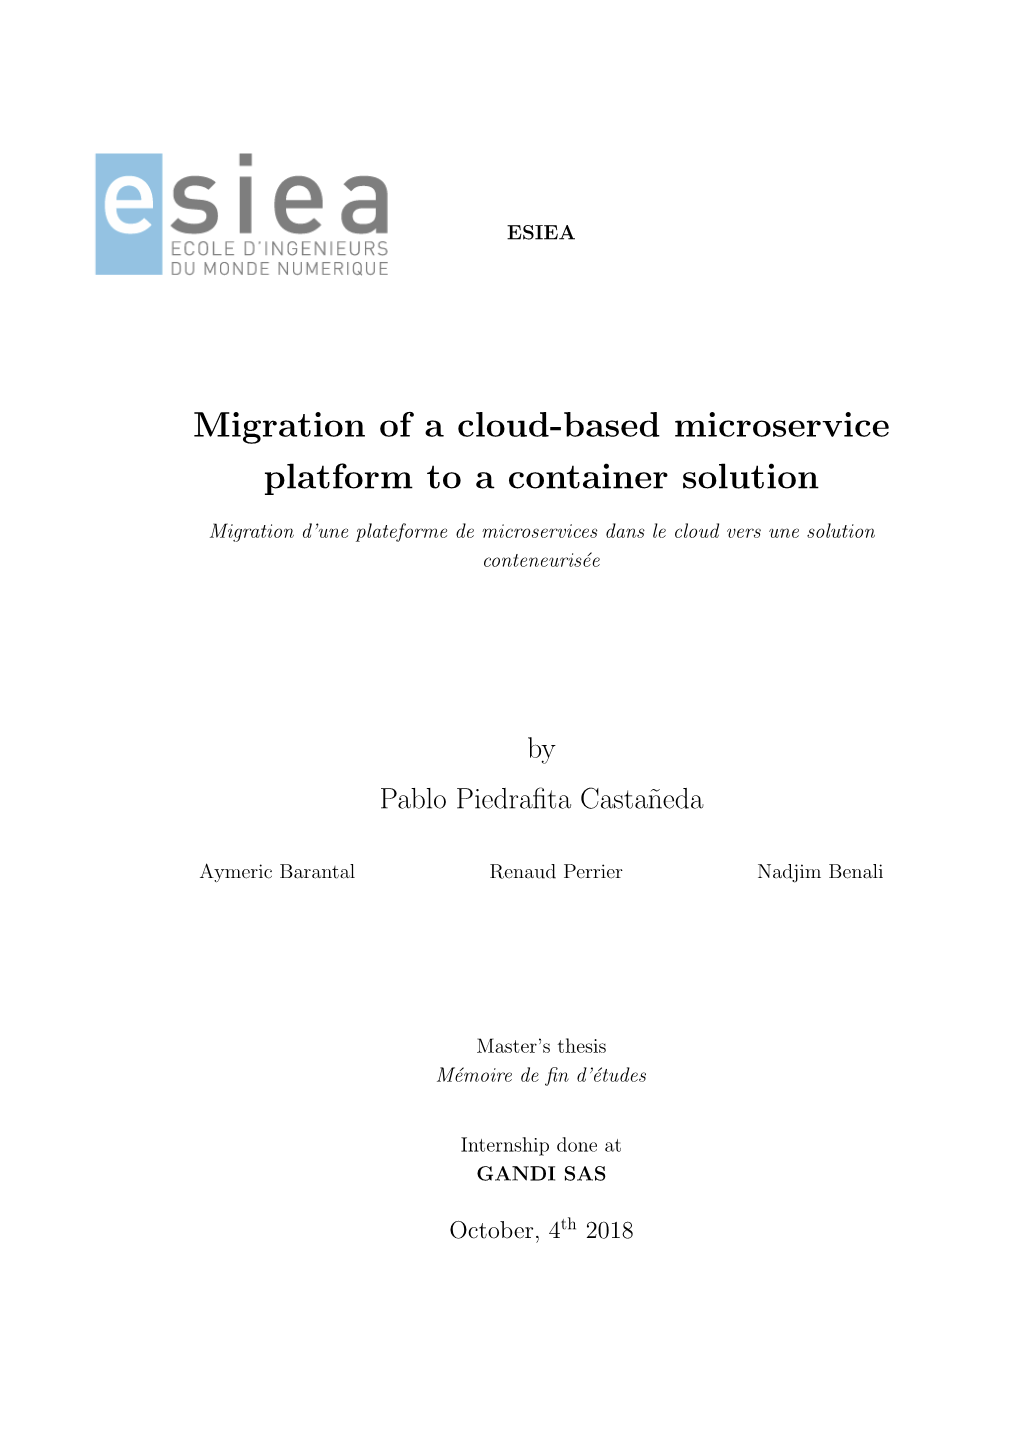 Migration of a Cloud-Based Microservice Platform to a Container Solution